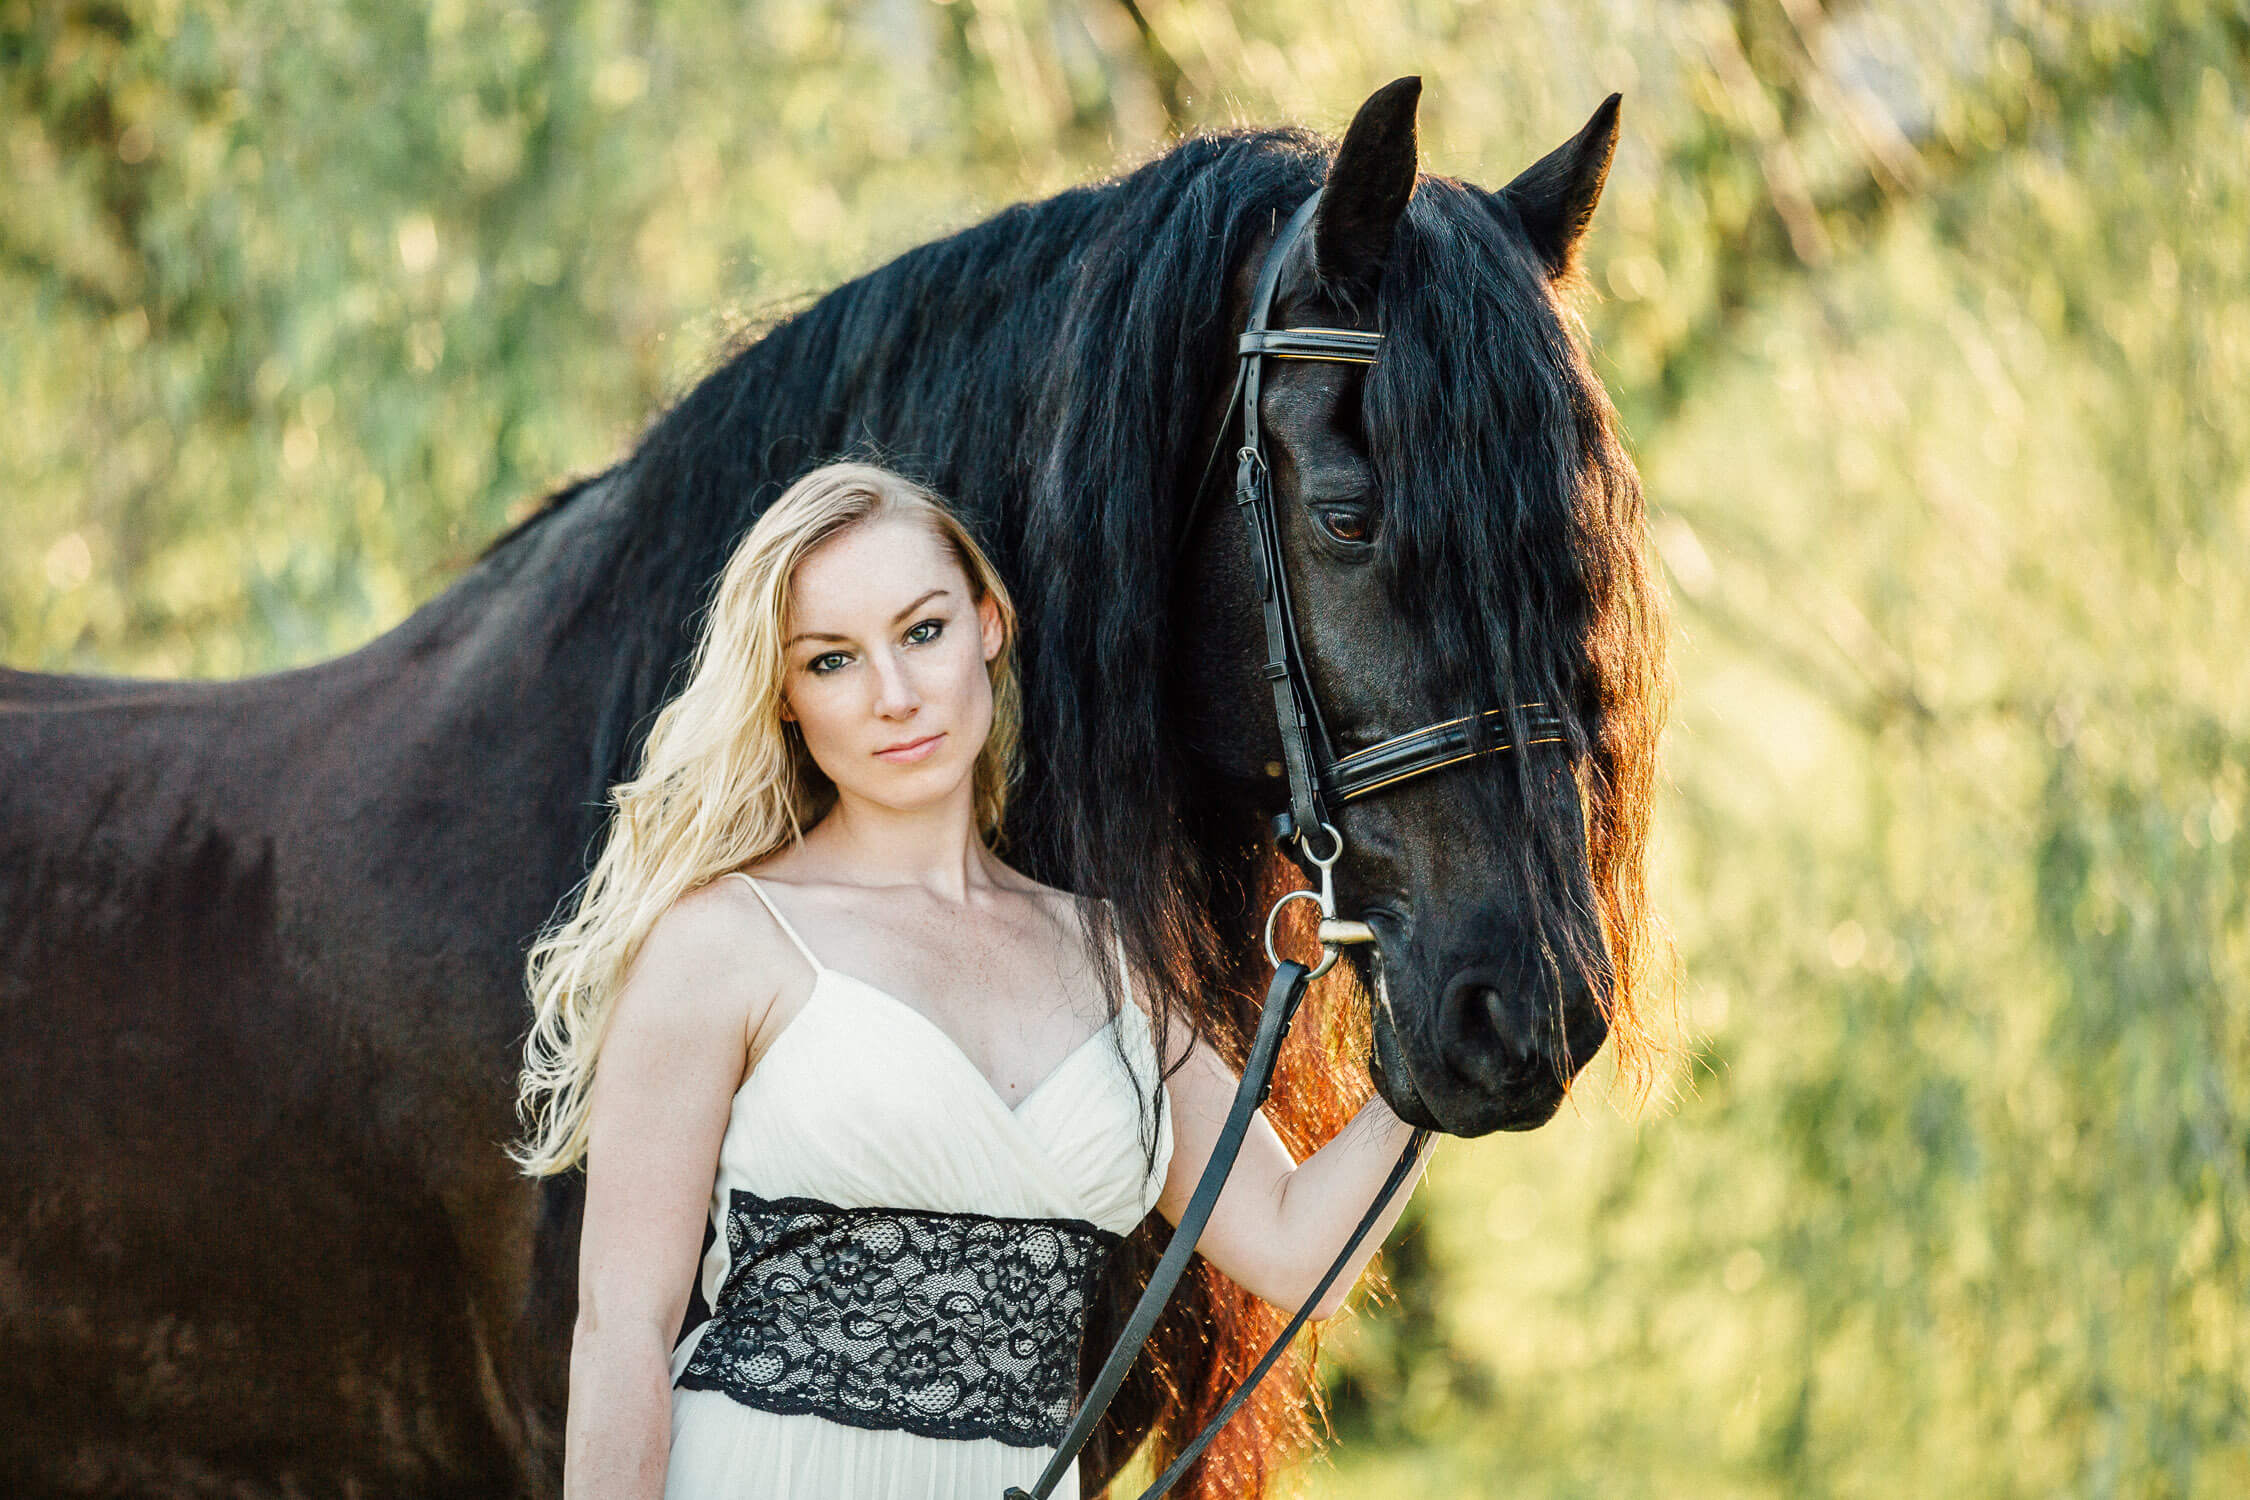 Black friesian horse and rider ready for photo session